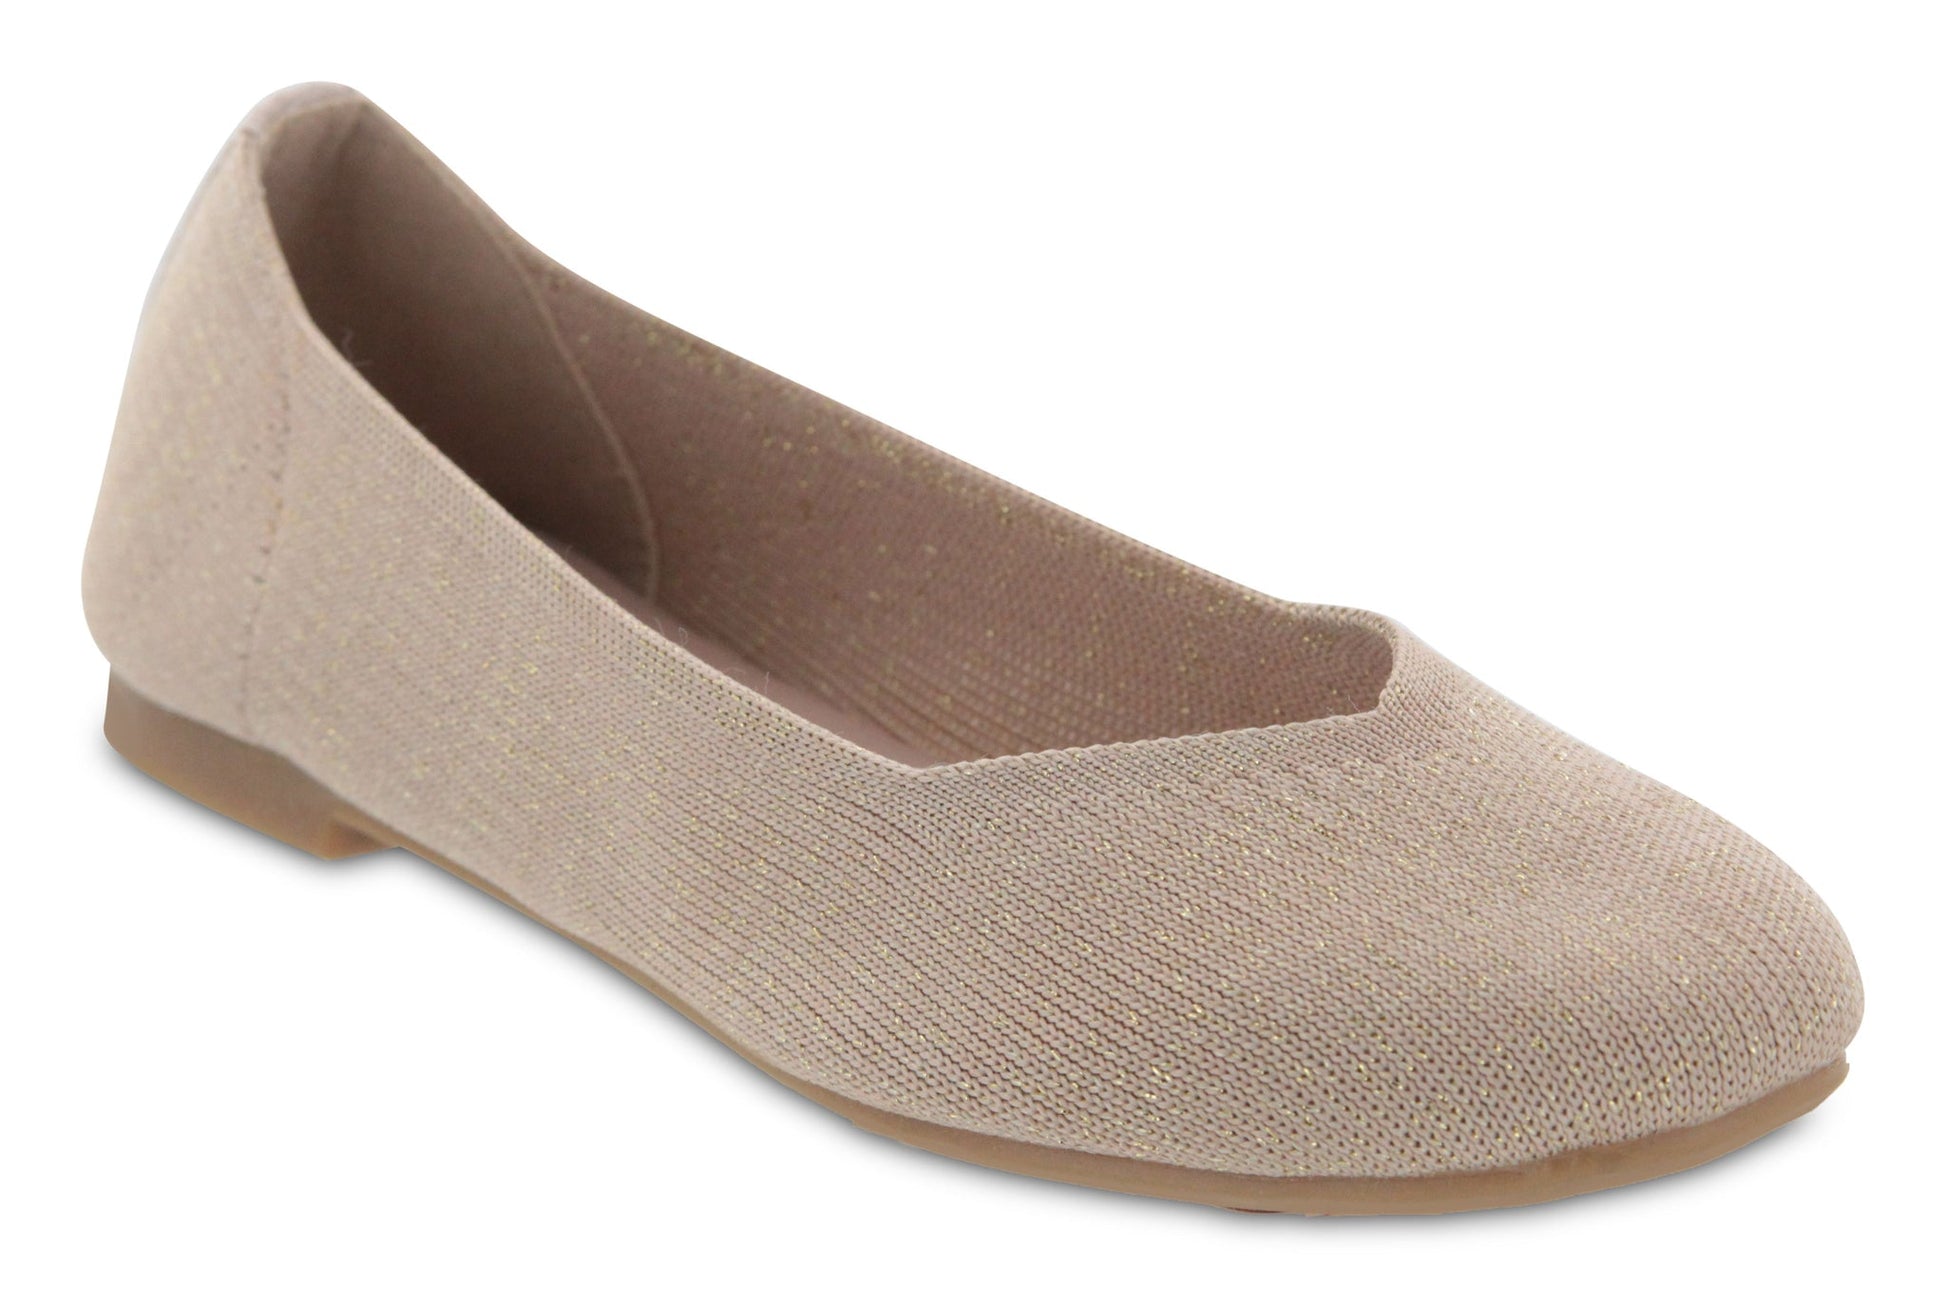 Girl's MIA Kids, Kandi Flat - Little Kid & Big Kid. These cute knit flats will go with everything and will be a versatile option for her. She will love the soft, stretchy uppers and dressy look.  Manmade knit fabric uppers Slip-on style Fabric linings Lightly padded contour footbed Manmade outsole